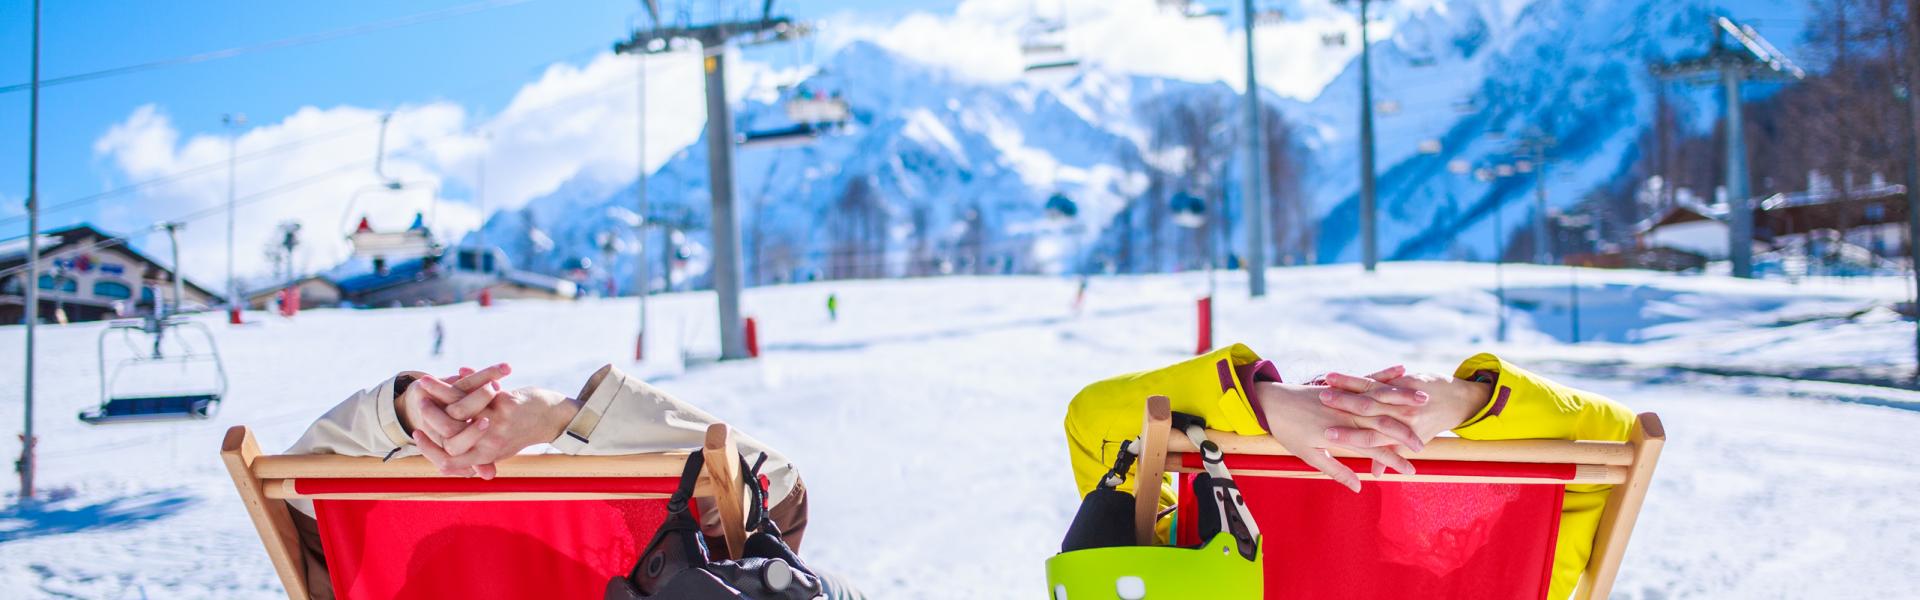 Most Affordable Vermont Ski Resorts for New Year's 2019 - HomeToGo